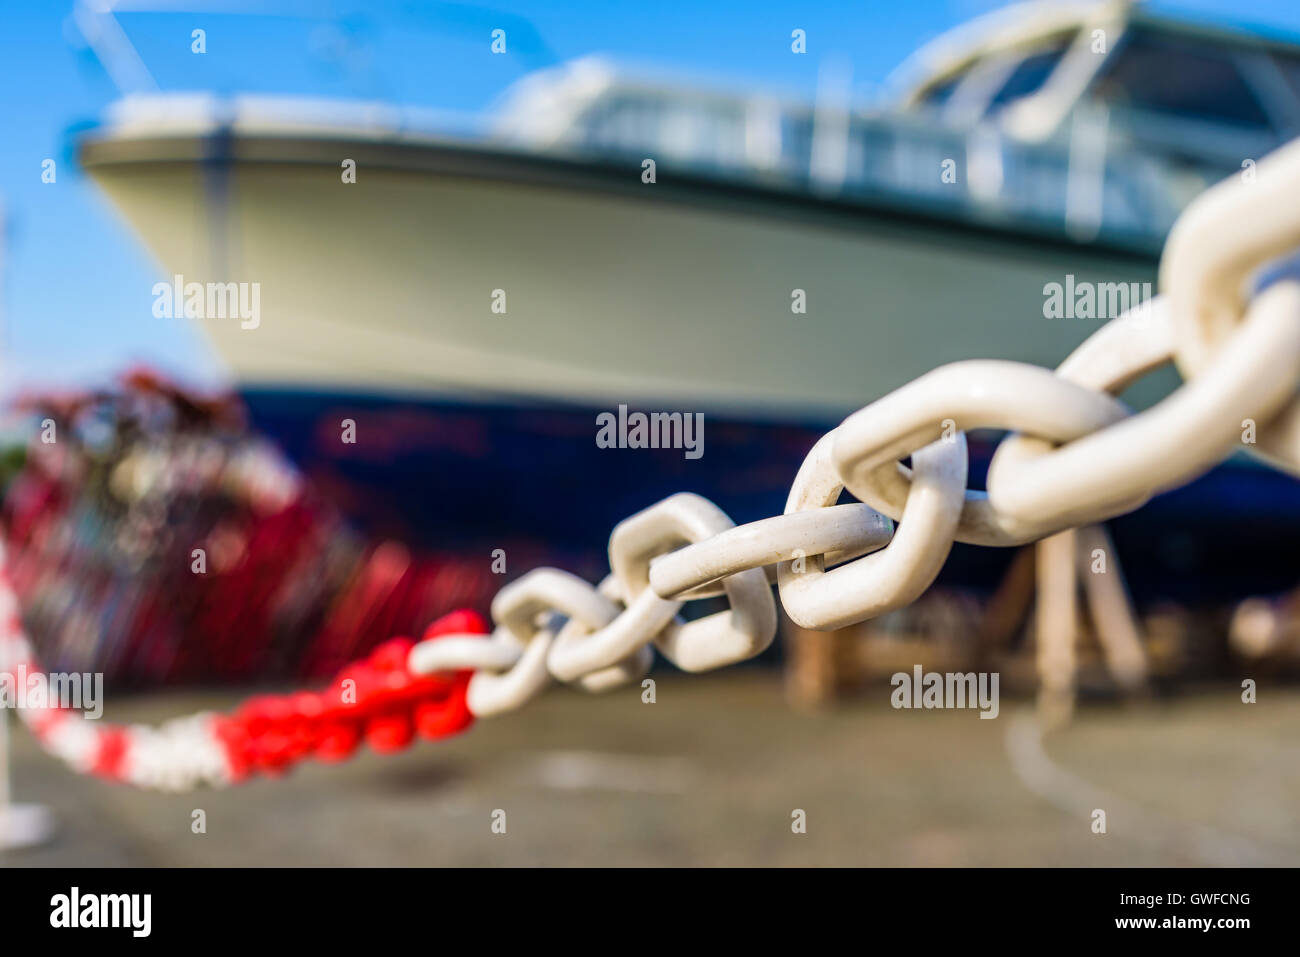 Narrow focus on white and red plastic chain with large blurred motorboat in background. Stock Photo